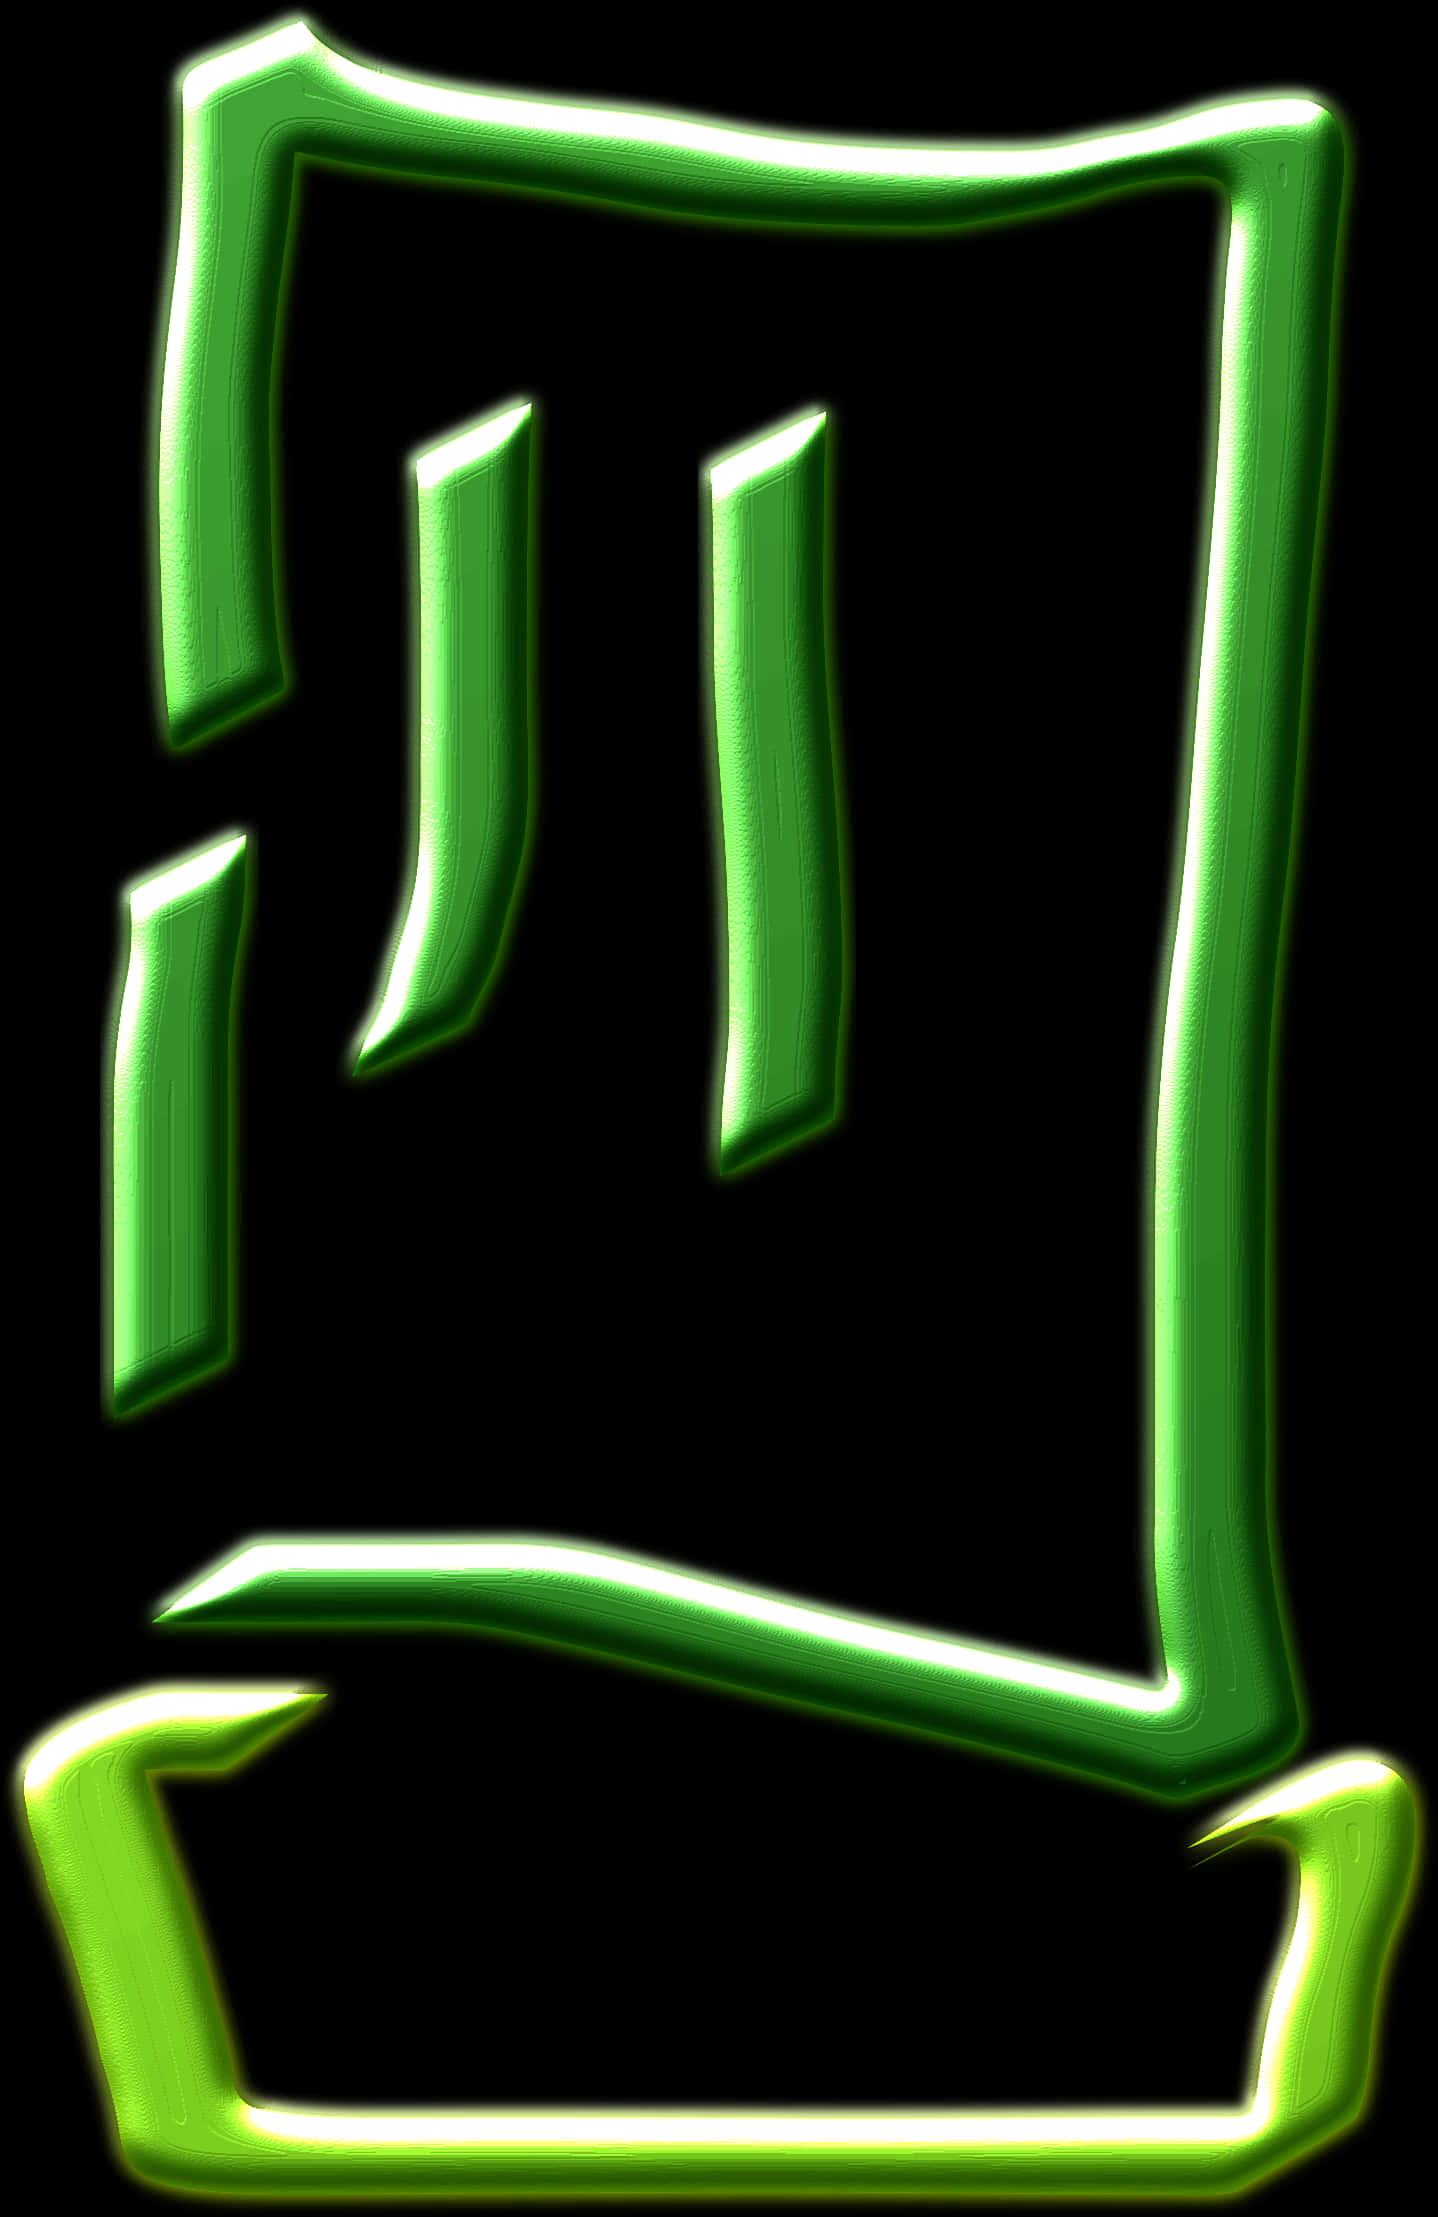 A Green And Black Background